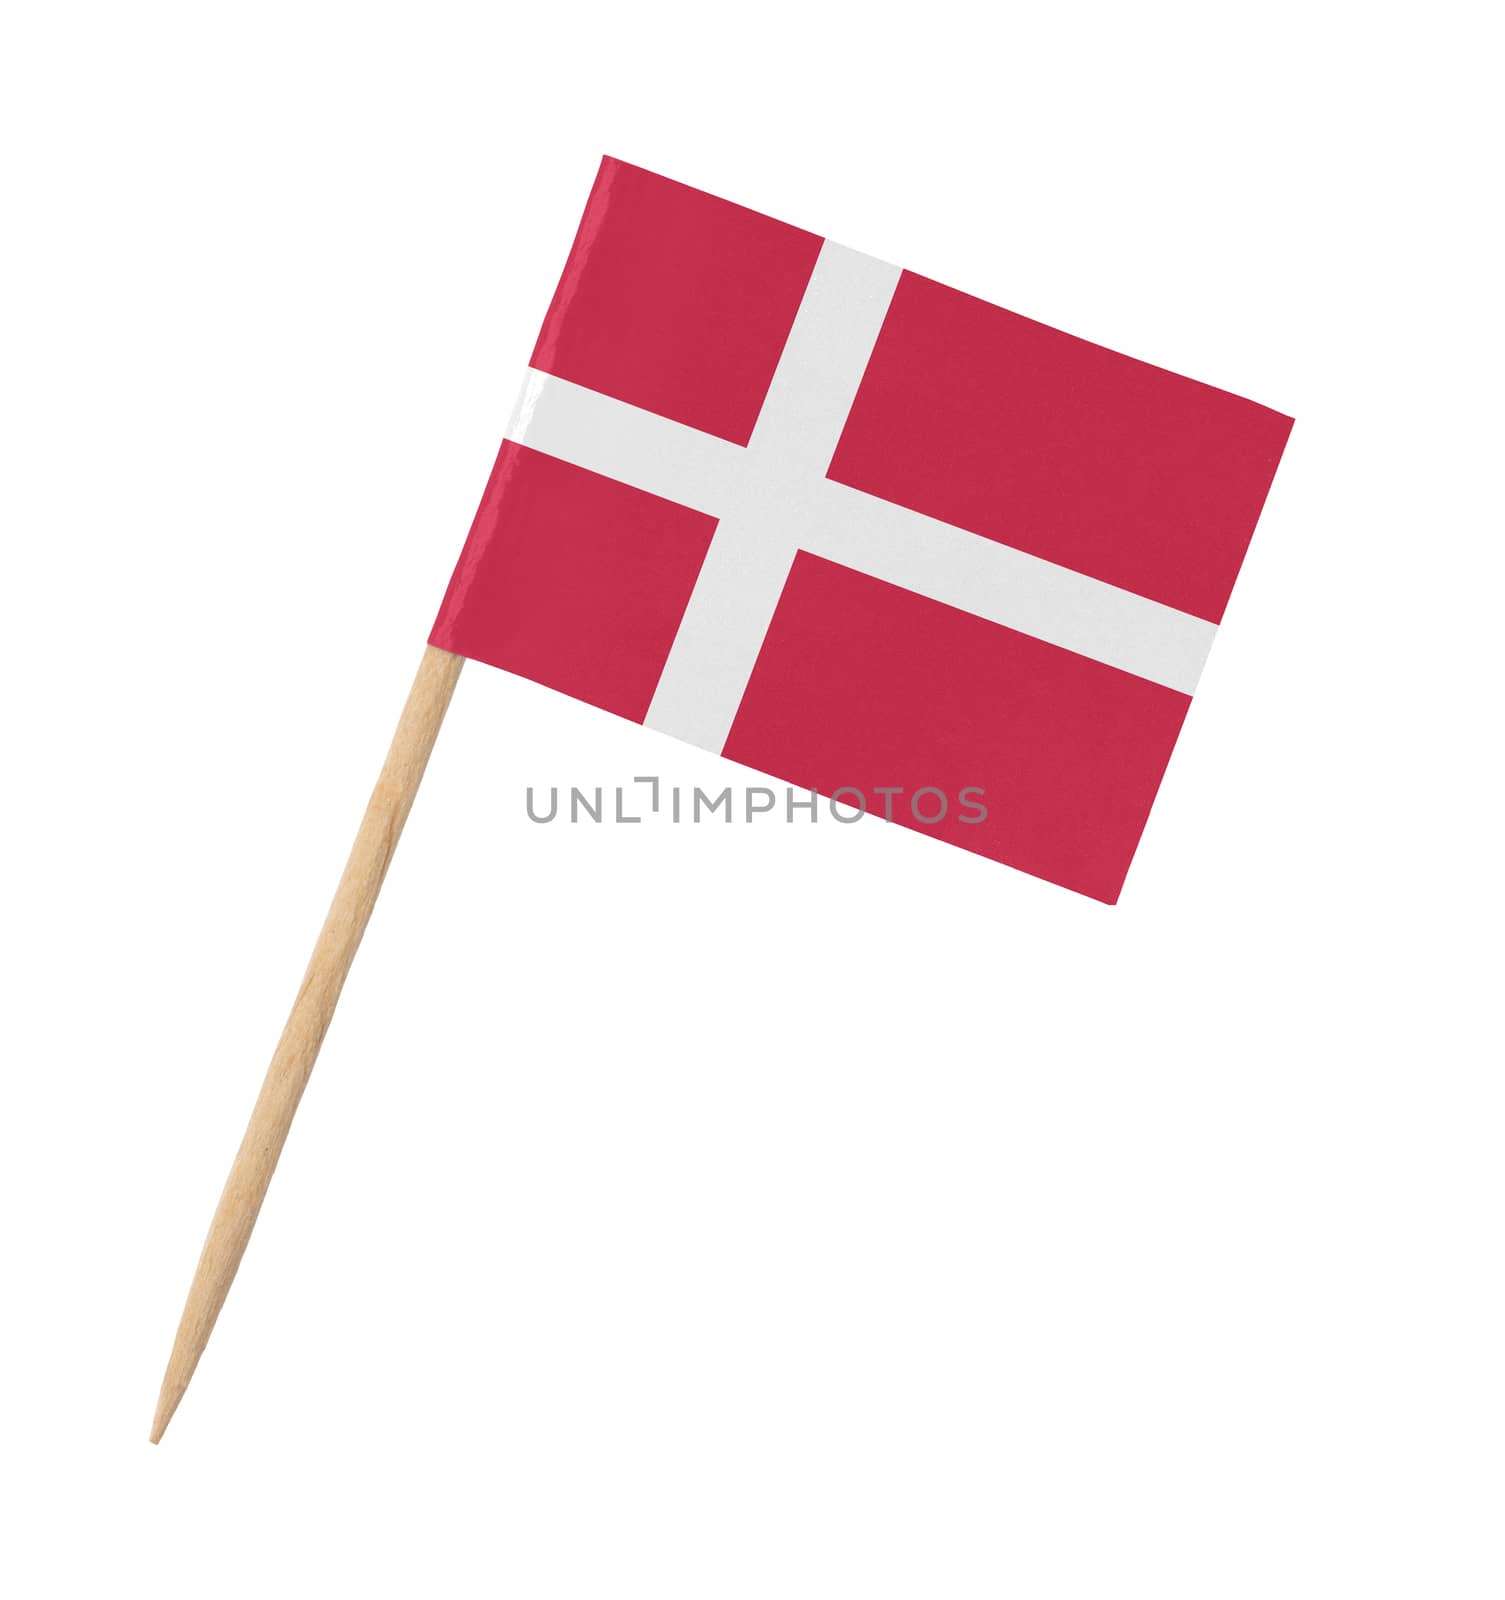 Small paper Danish flag on wooden stick, isolated on white